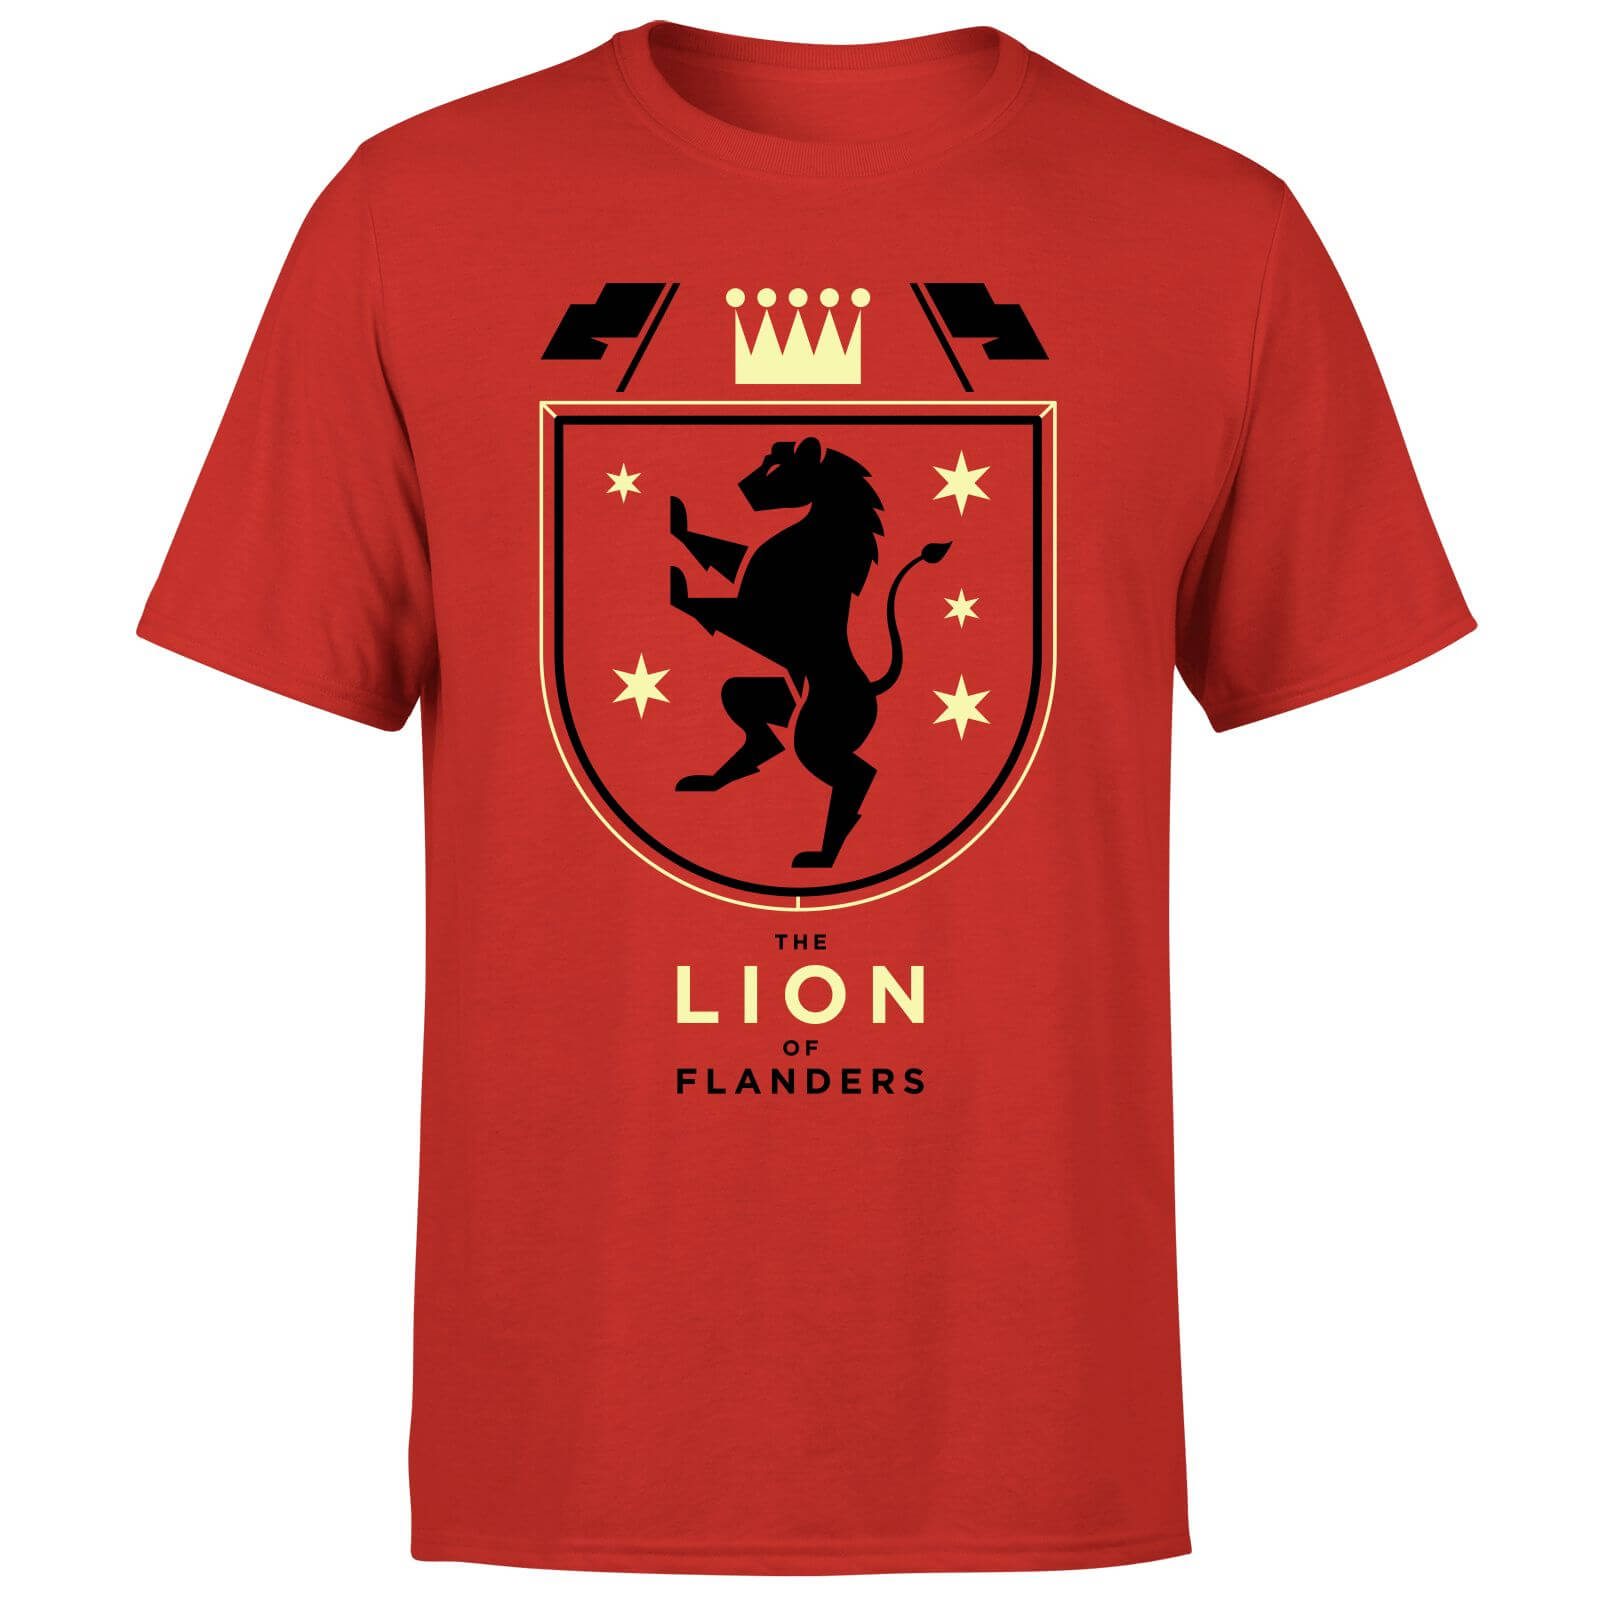 The Lion Of Flanders Men's T-Shirt - L - Red